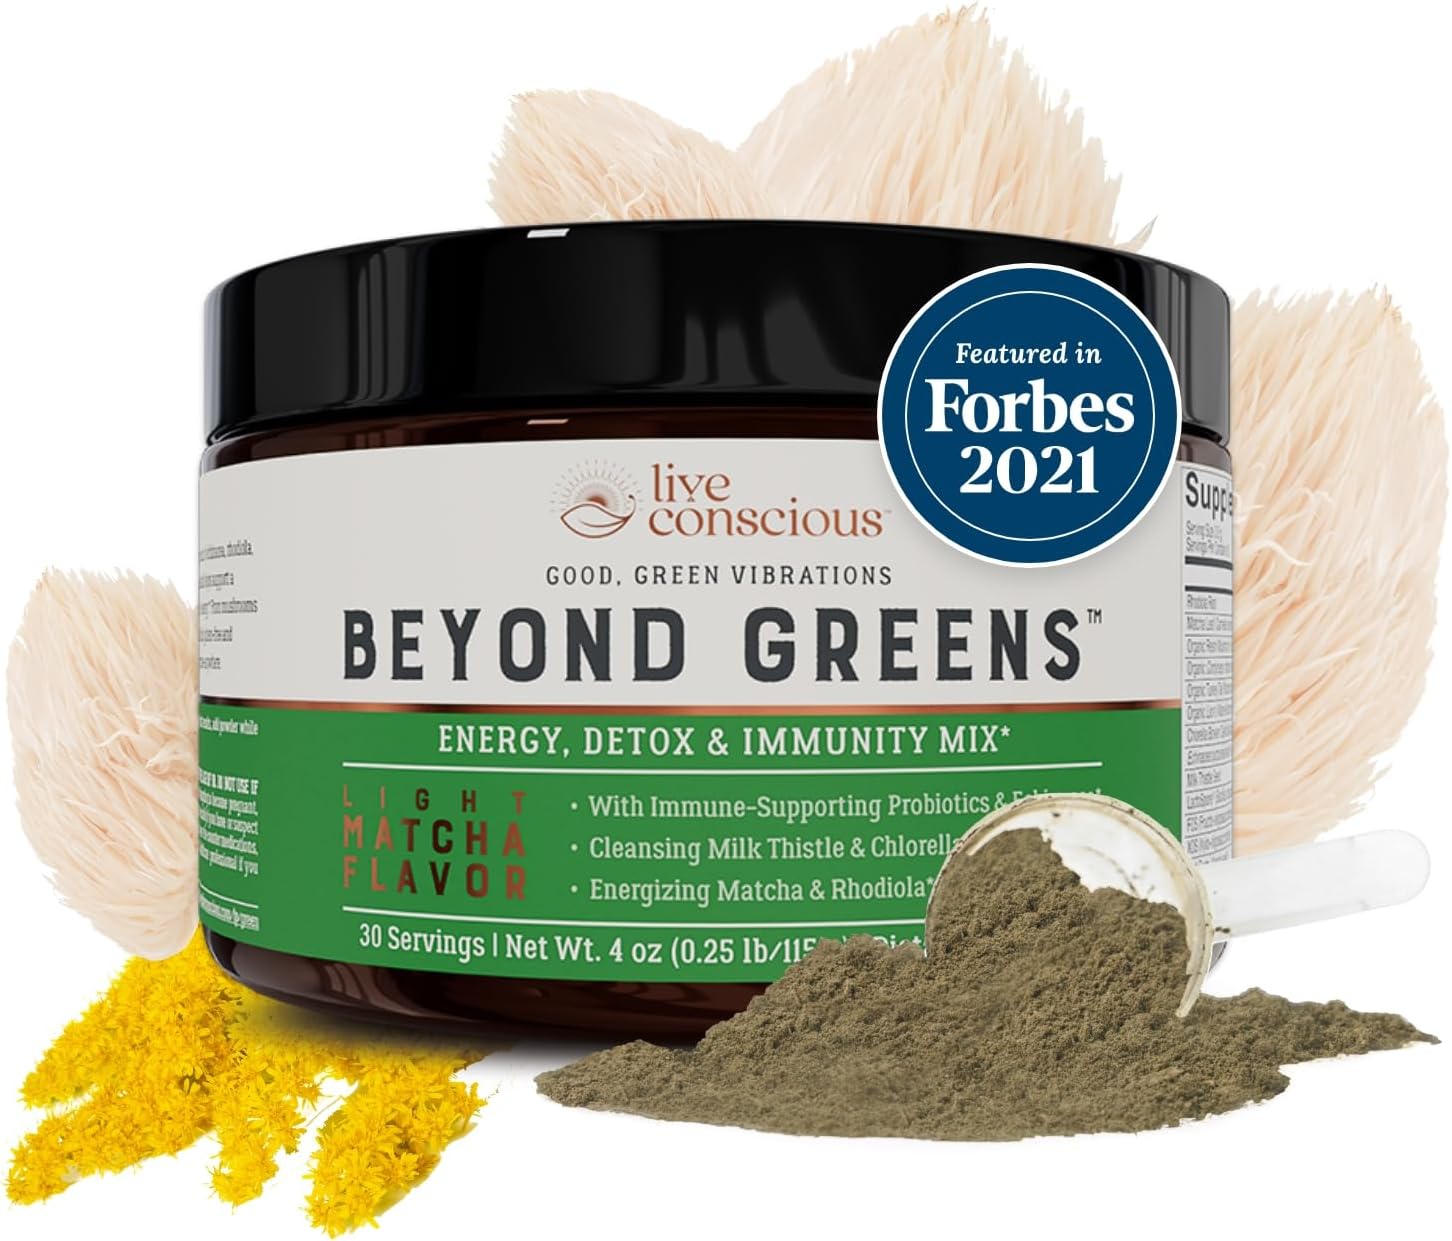 Live Conscious Beyond Greens Super Greens Powder Superfood - Delicious Debloating Green Powder - Matcha Greens Blend Superfood Powder w/Chlorella, Echinacea, Probiotics for Immune Support Energy